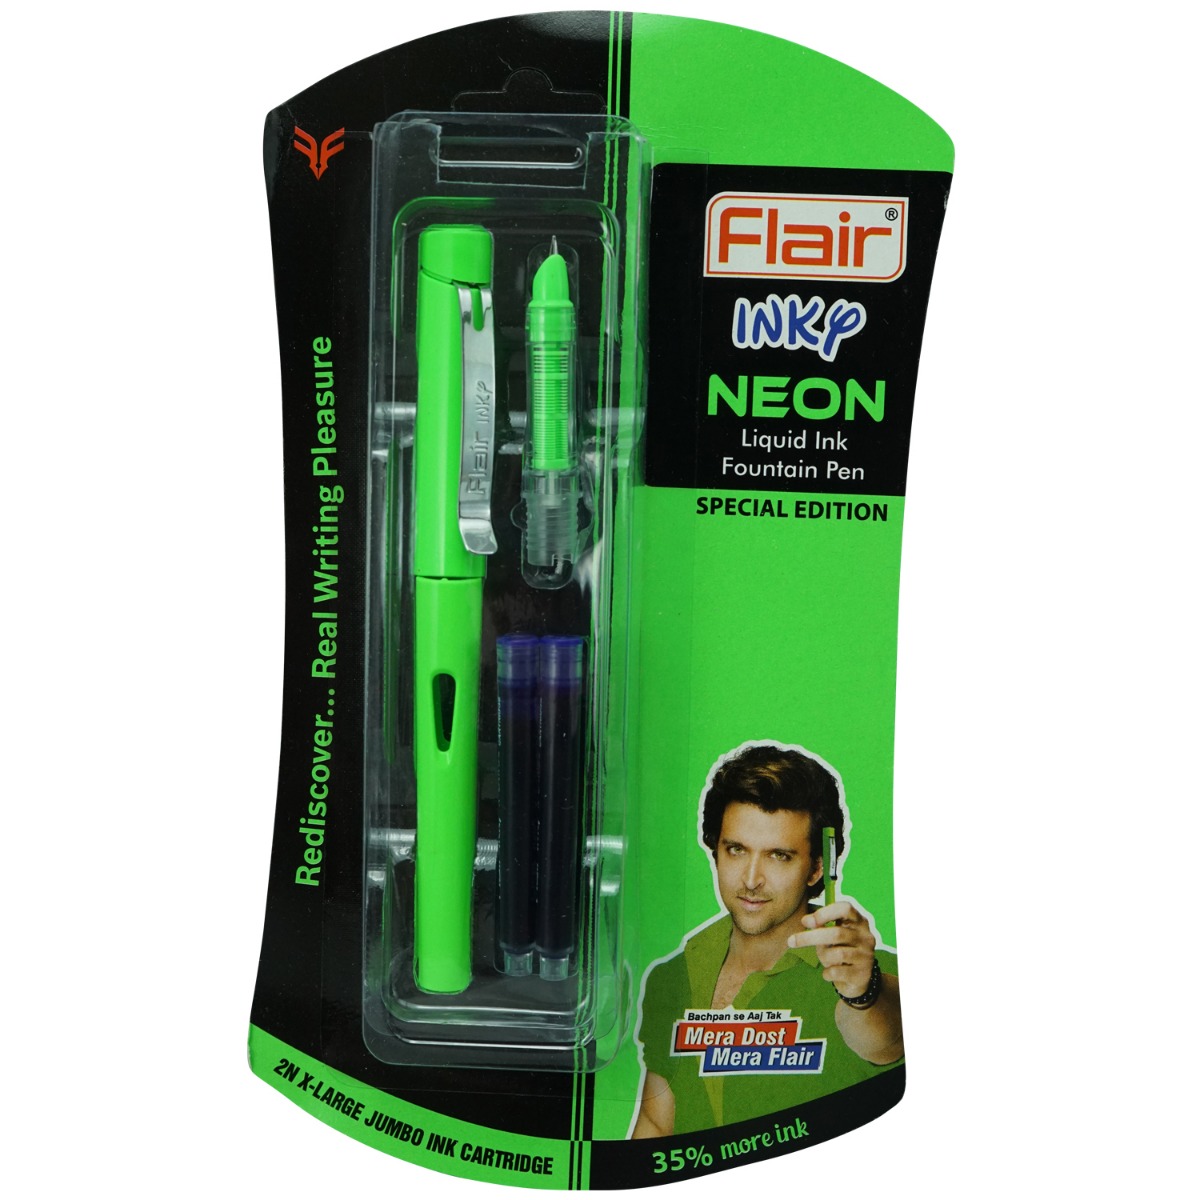 Flair Inky Neon Model:16174 Luminous Green Color Body  With 2 Catridge Fine Tip Fountain Pen